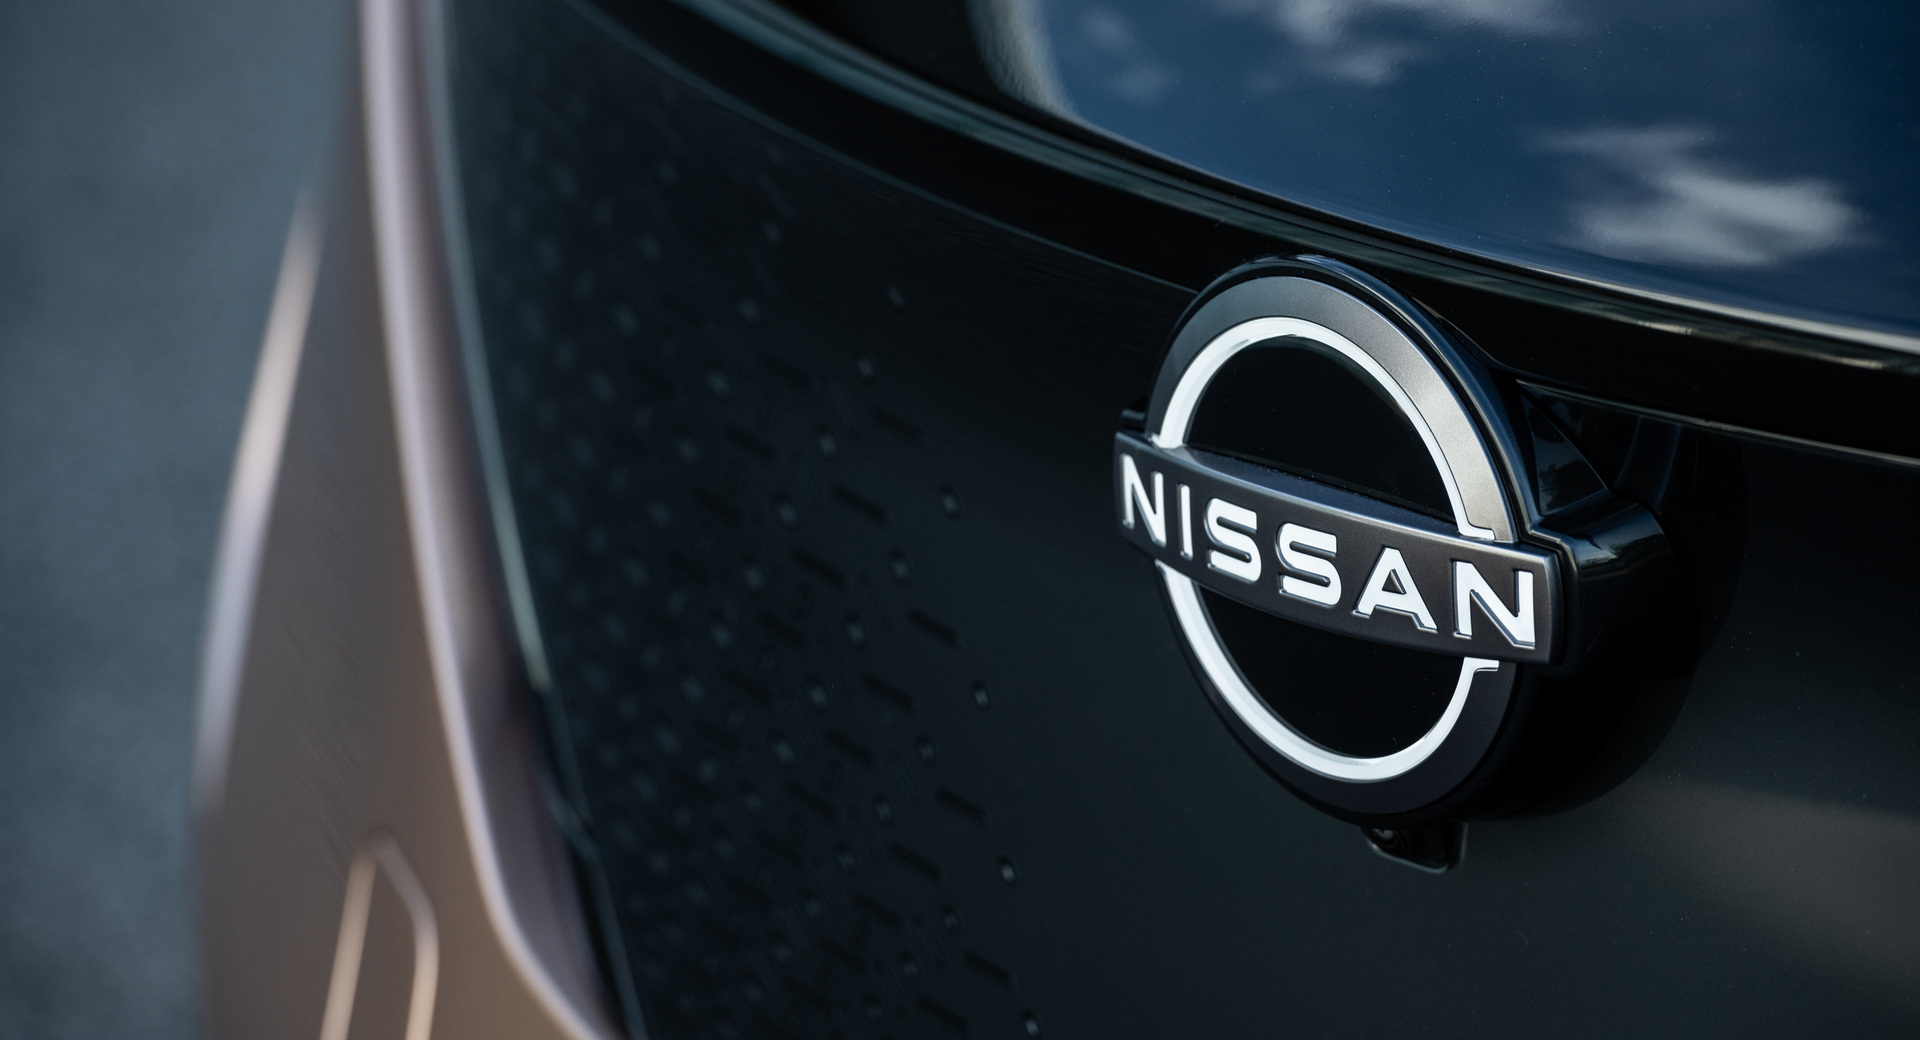 Professor Of Design Analyzes Nissan&amp;#39;s New Logo And How It Has Evolved Over Time | Carscoops